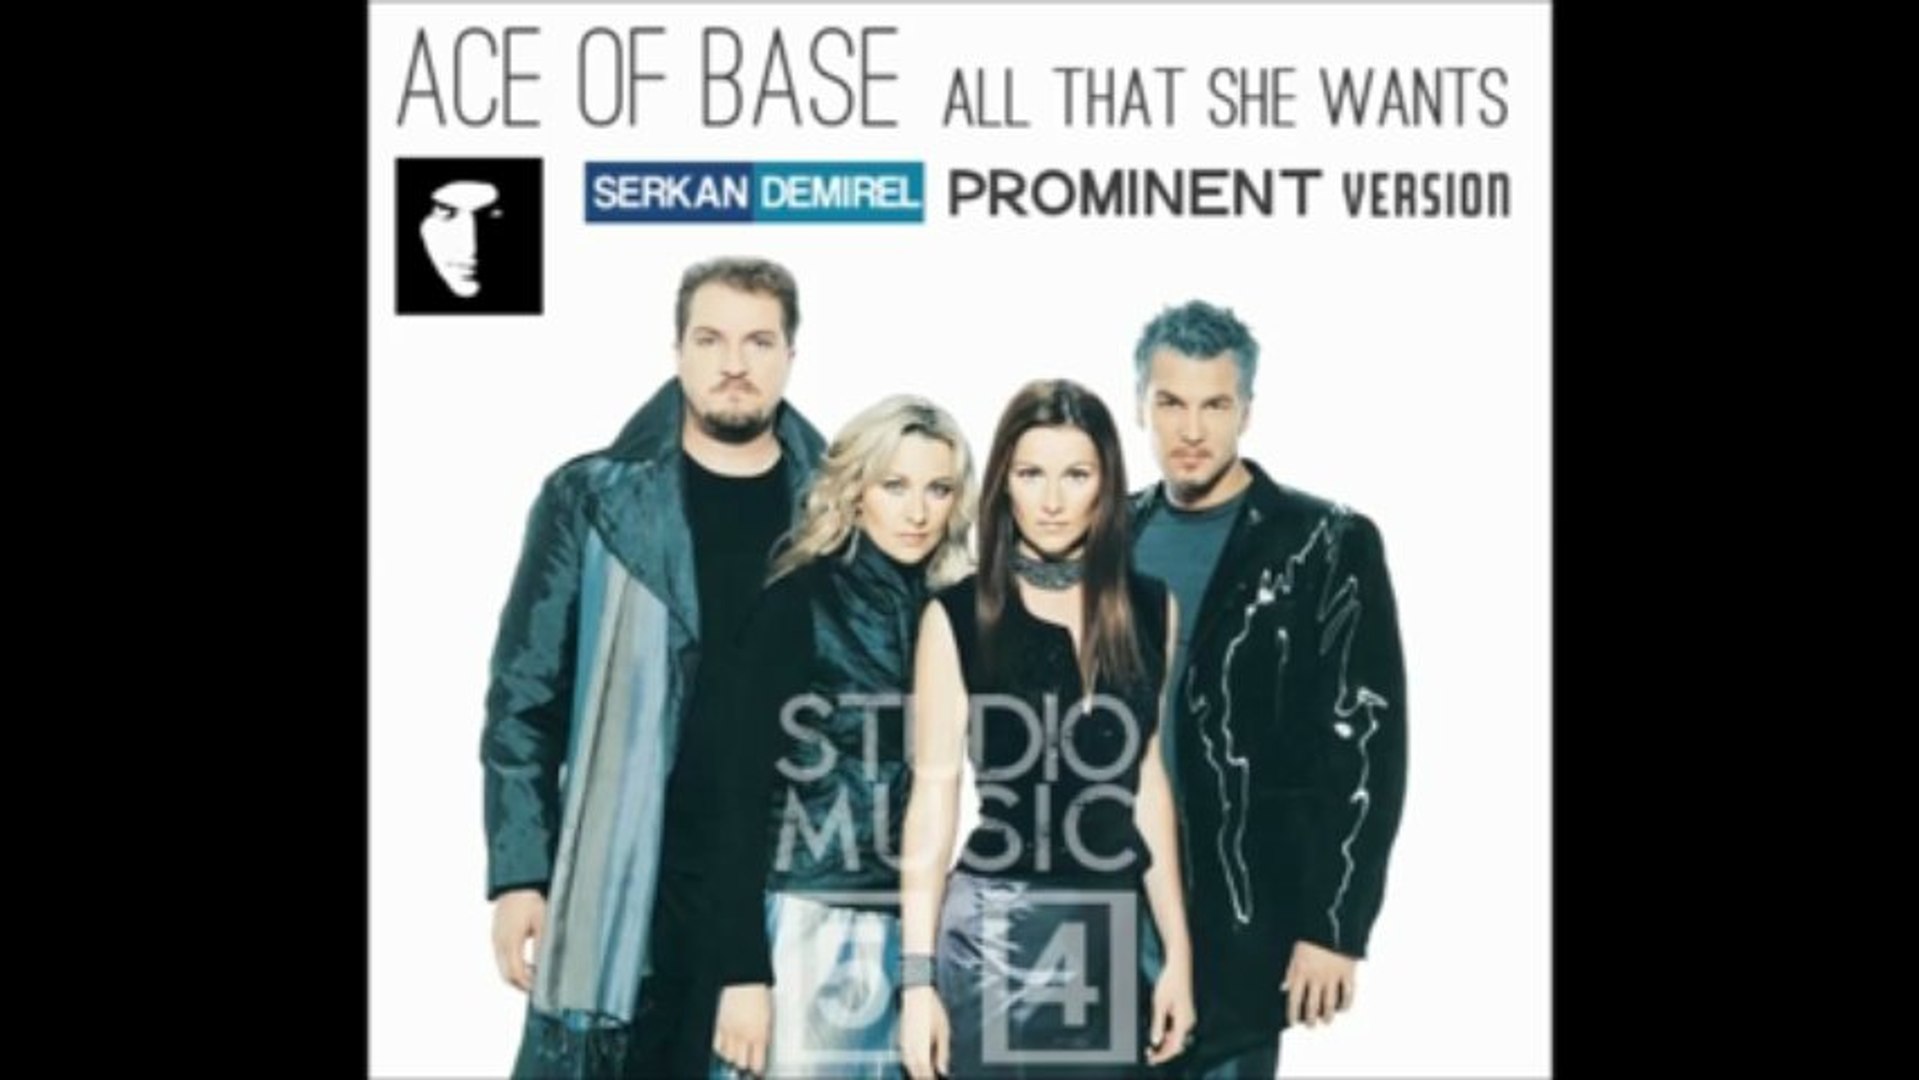 Ace Of Base - All That She Wants (Serkan Demirel Prominent Version) -  Dailymotion Video